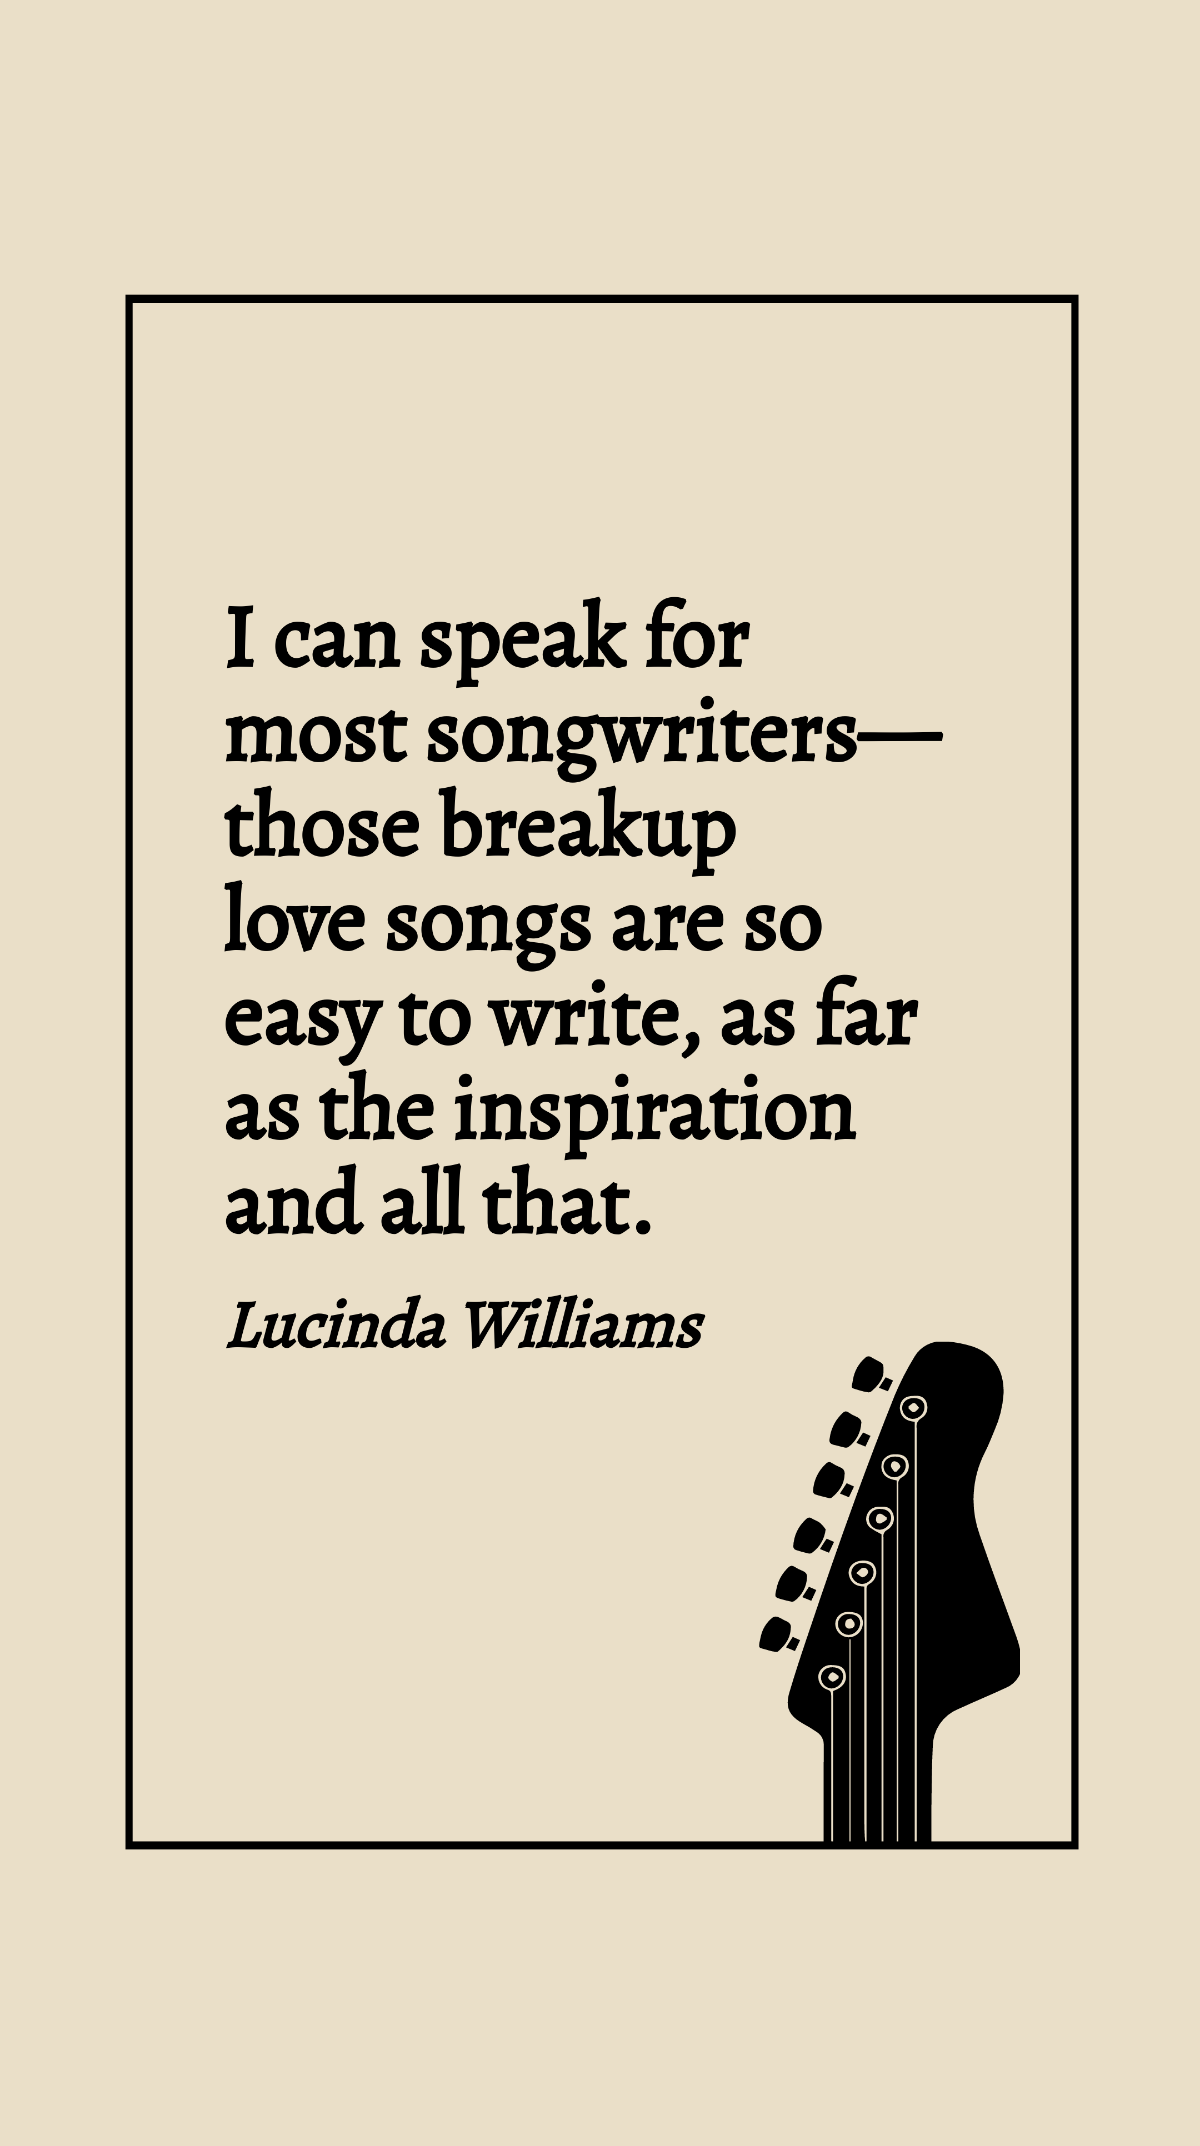 Lucinda Williams - I can speak for most songwriters - those breakup love songs are so easy to write, as far as the inspiration and all that. Template